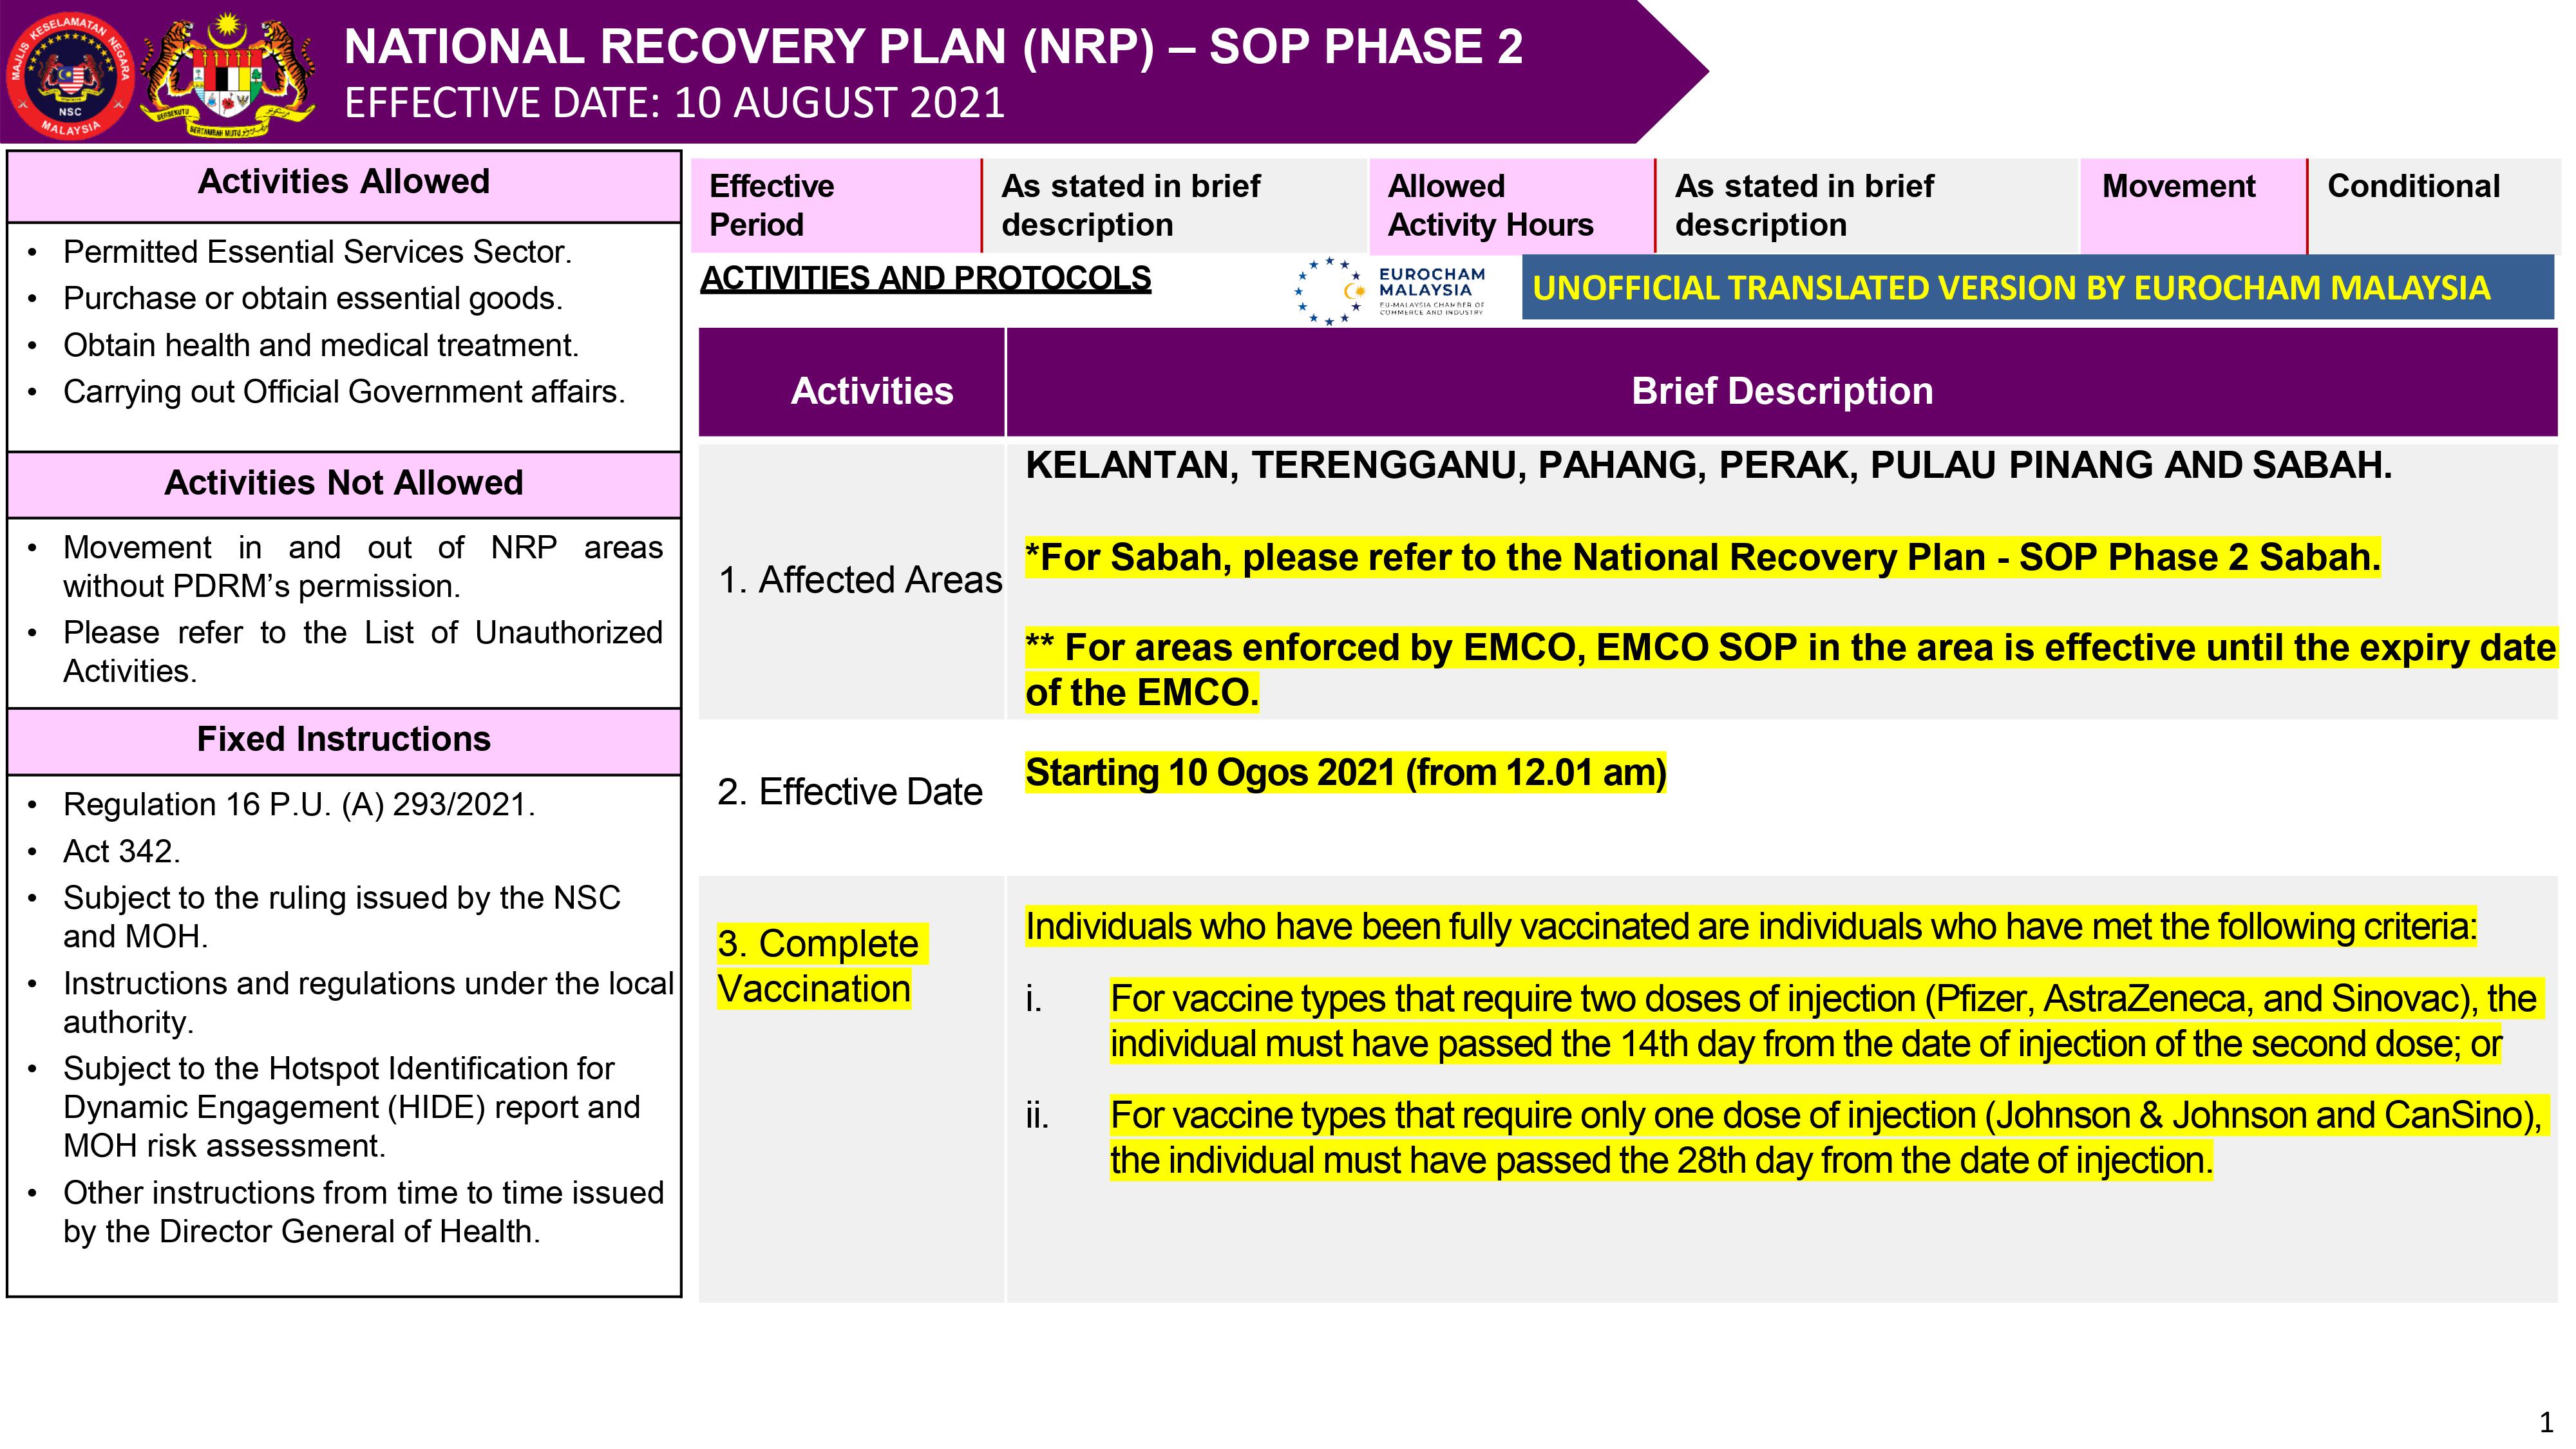 National recovery plan malaysia